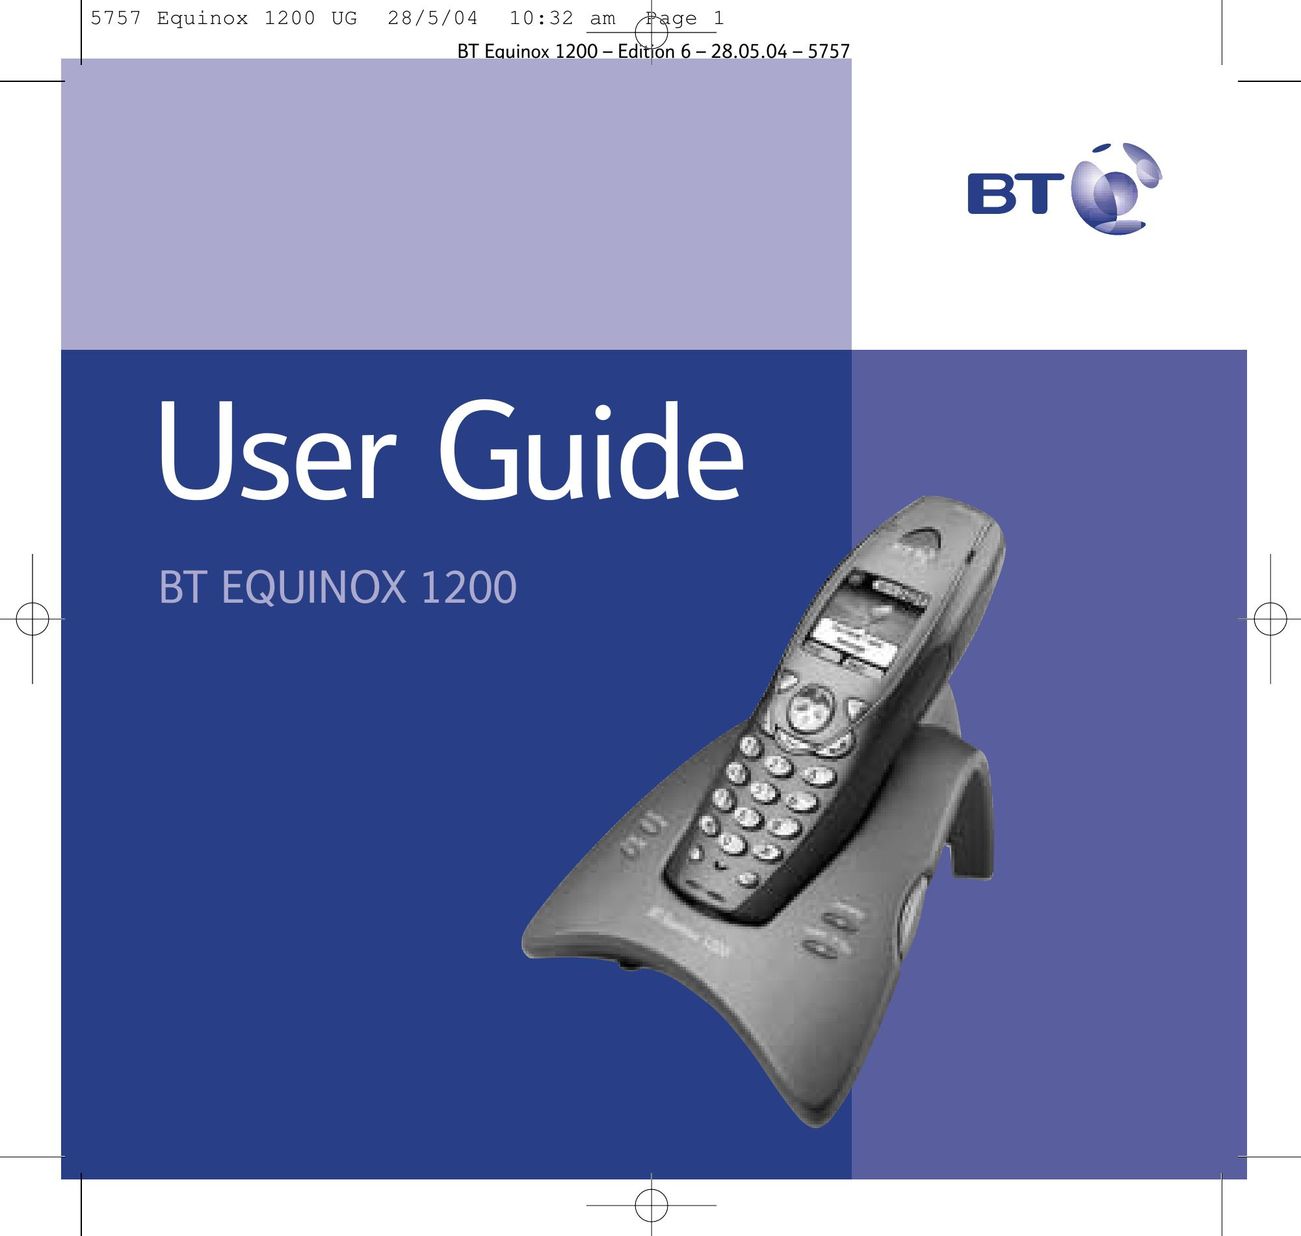 BT Corded Headset Corded Headset User Manual (Page 1)